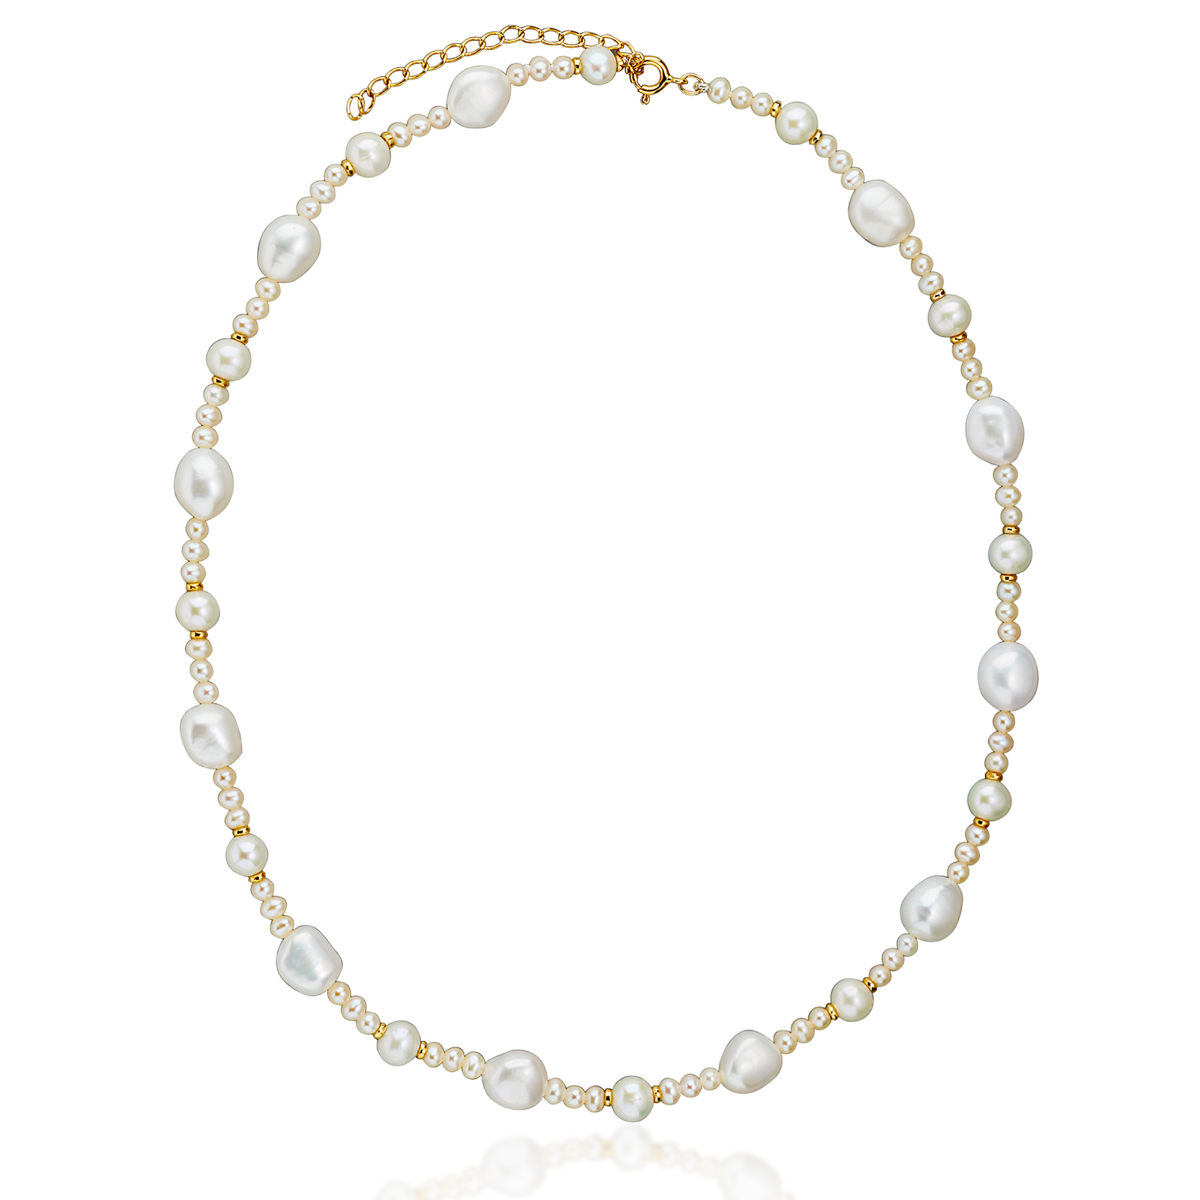 Gold-filled 6.5mm Real Pearl Necklace, off White Cream Freshwater Pearl  Jewelry, Classic Single Strand Pearls W/ Gold Clasp for Men Women 